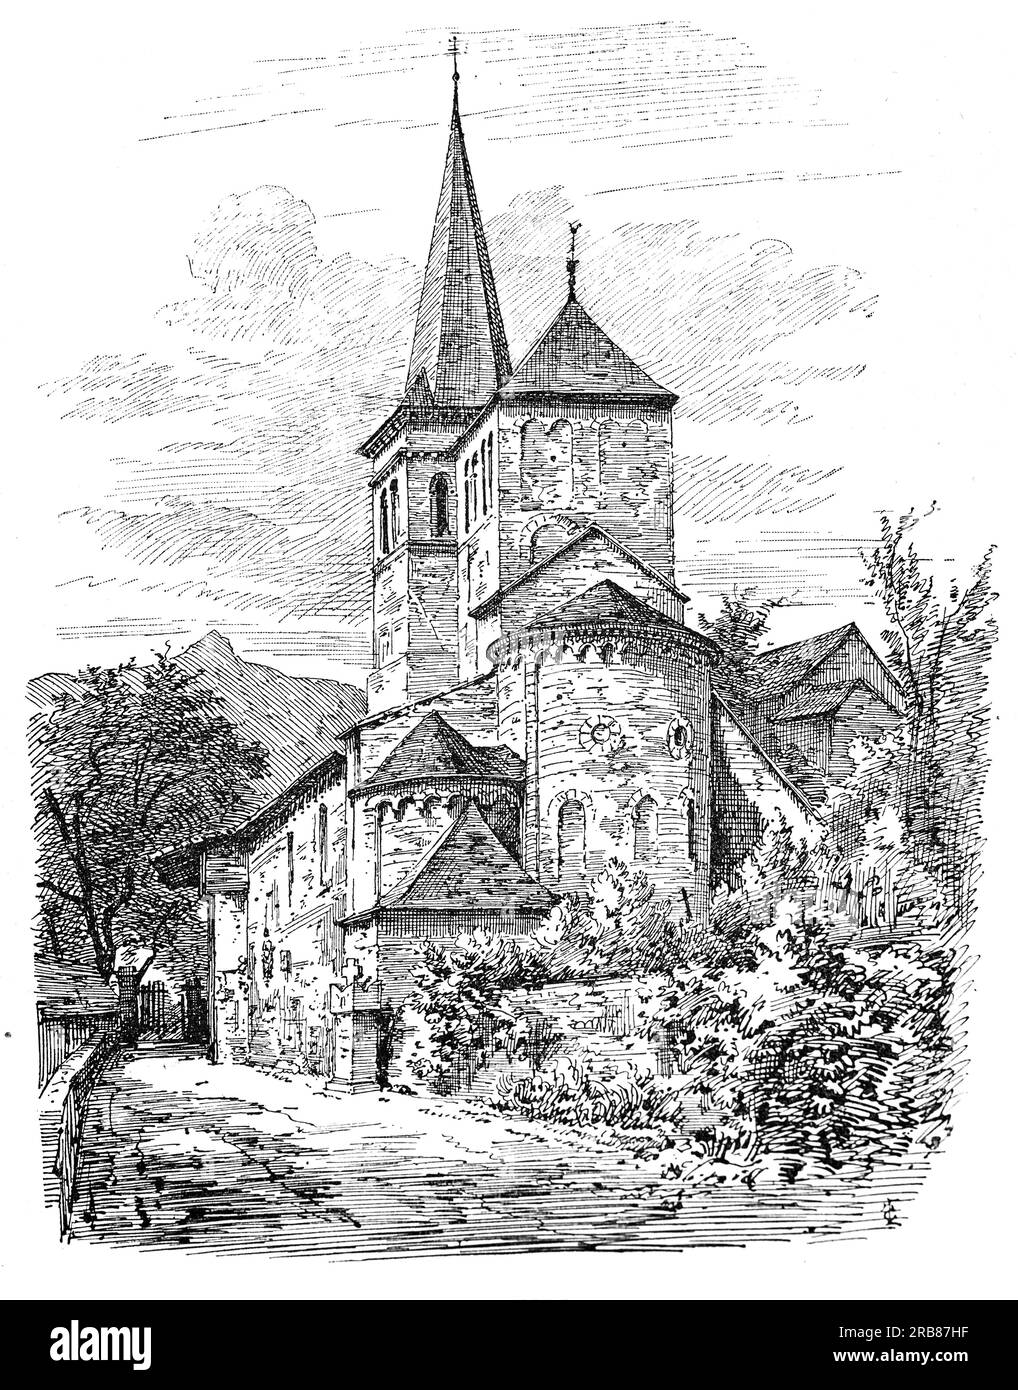 An early 19th century illustration of Eglise de Saint Aventin de Larboust, a Romanesque church located in the Pyrenees, in Saint-Aventin, Haute-Garonne in the Occitanie region of France. Dating from the 11th and 12th centuries, the church, with two bell towers is typical of Pyrenean Romanesque art, is dedicated to a shepherd from the valley, a very popular hermit who lived there towards the end of the 8th century. Stock Photo